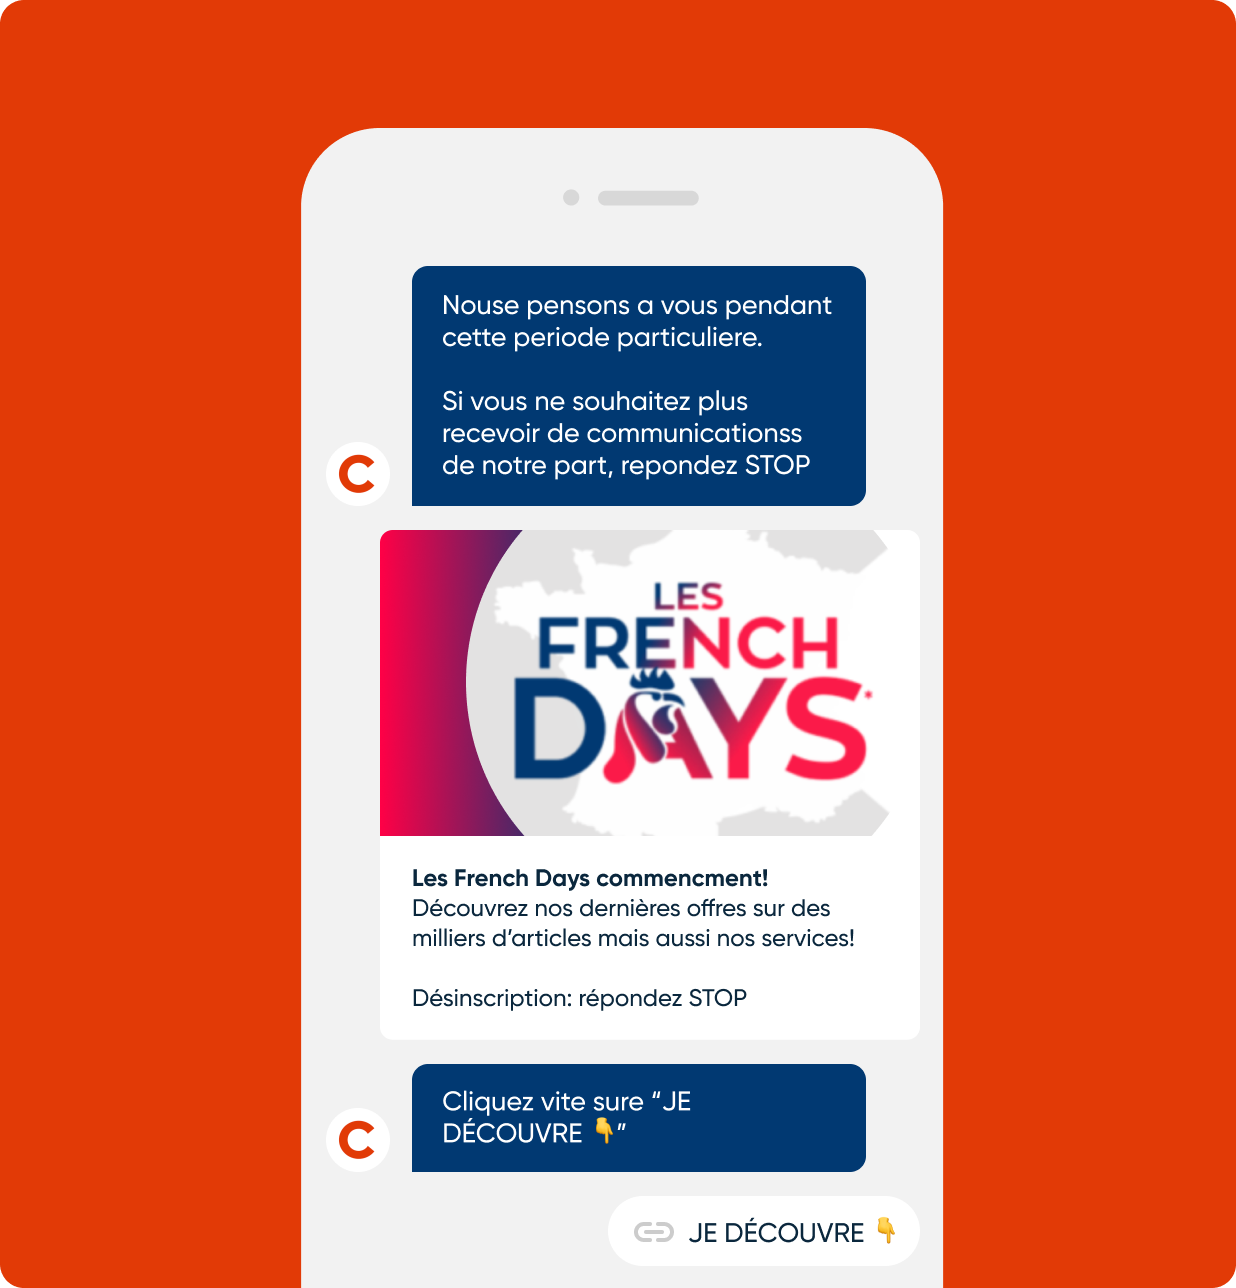 Les French Days by cDiscount